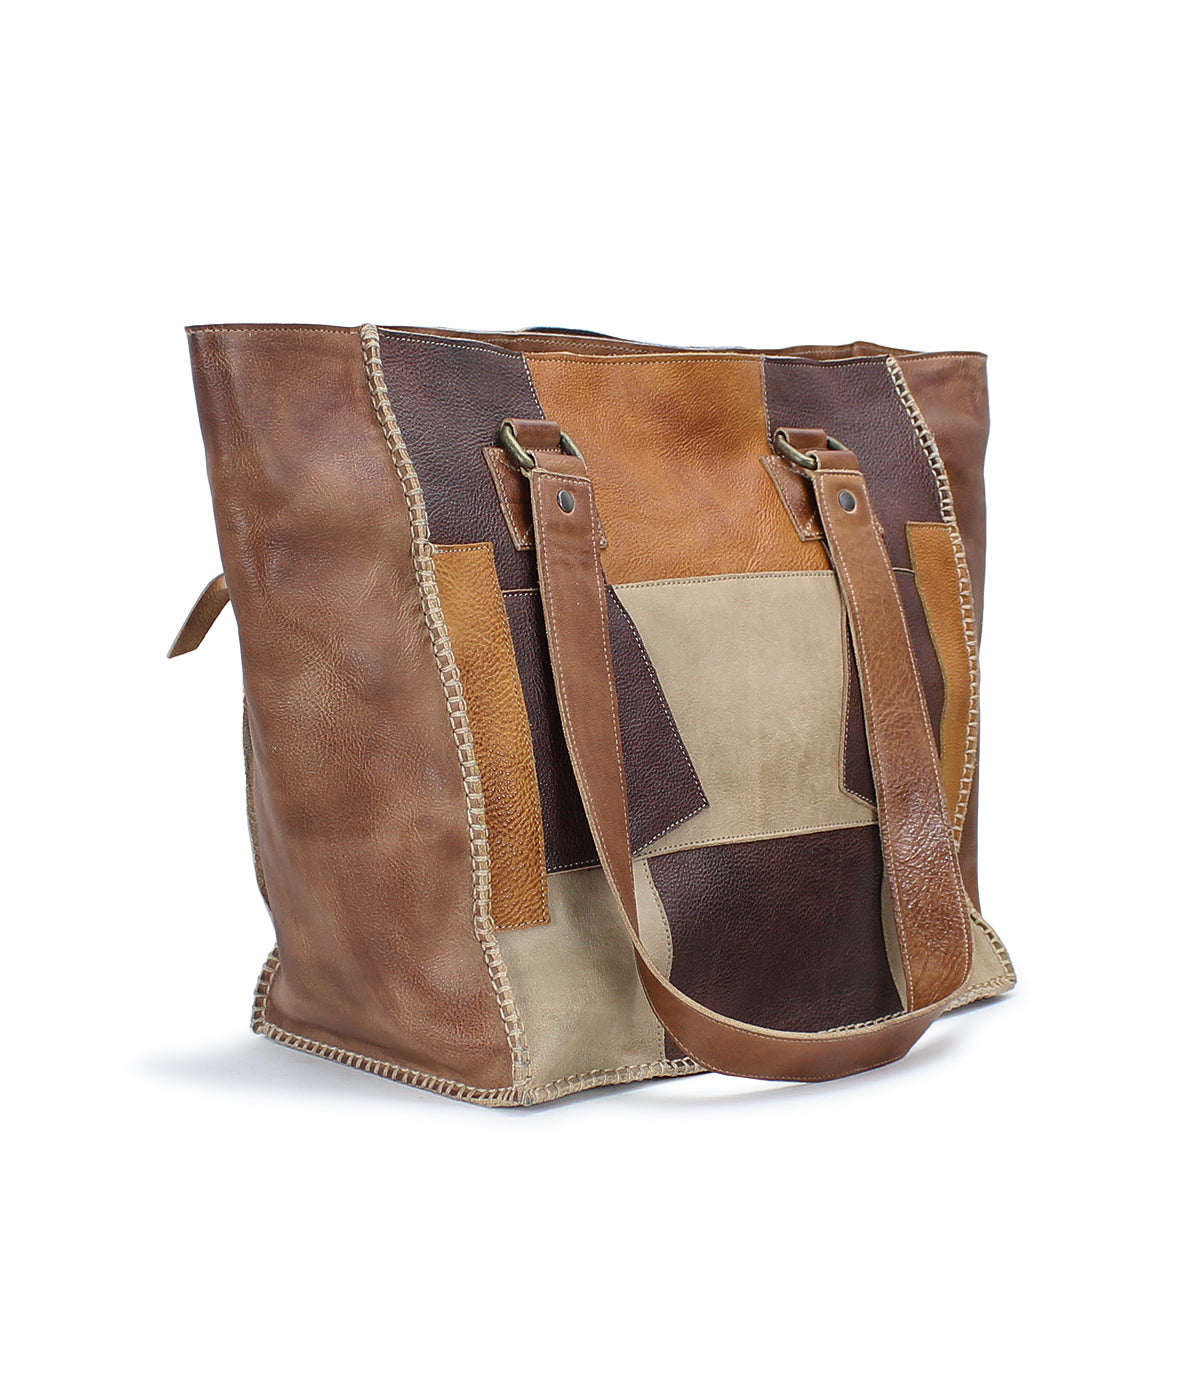 A brown and tan Celindra LTC II leather tote bag with vibrant multi-colored patches, by Bed Stu.